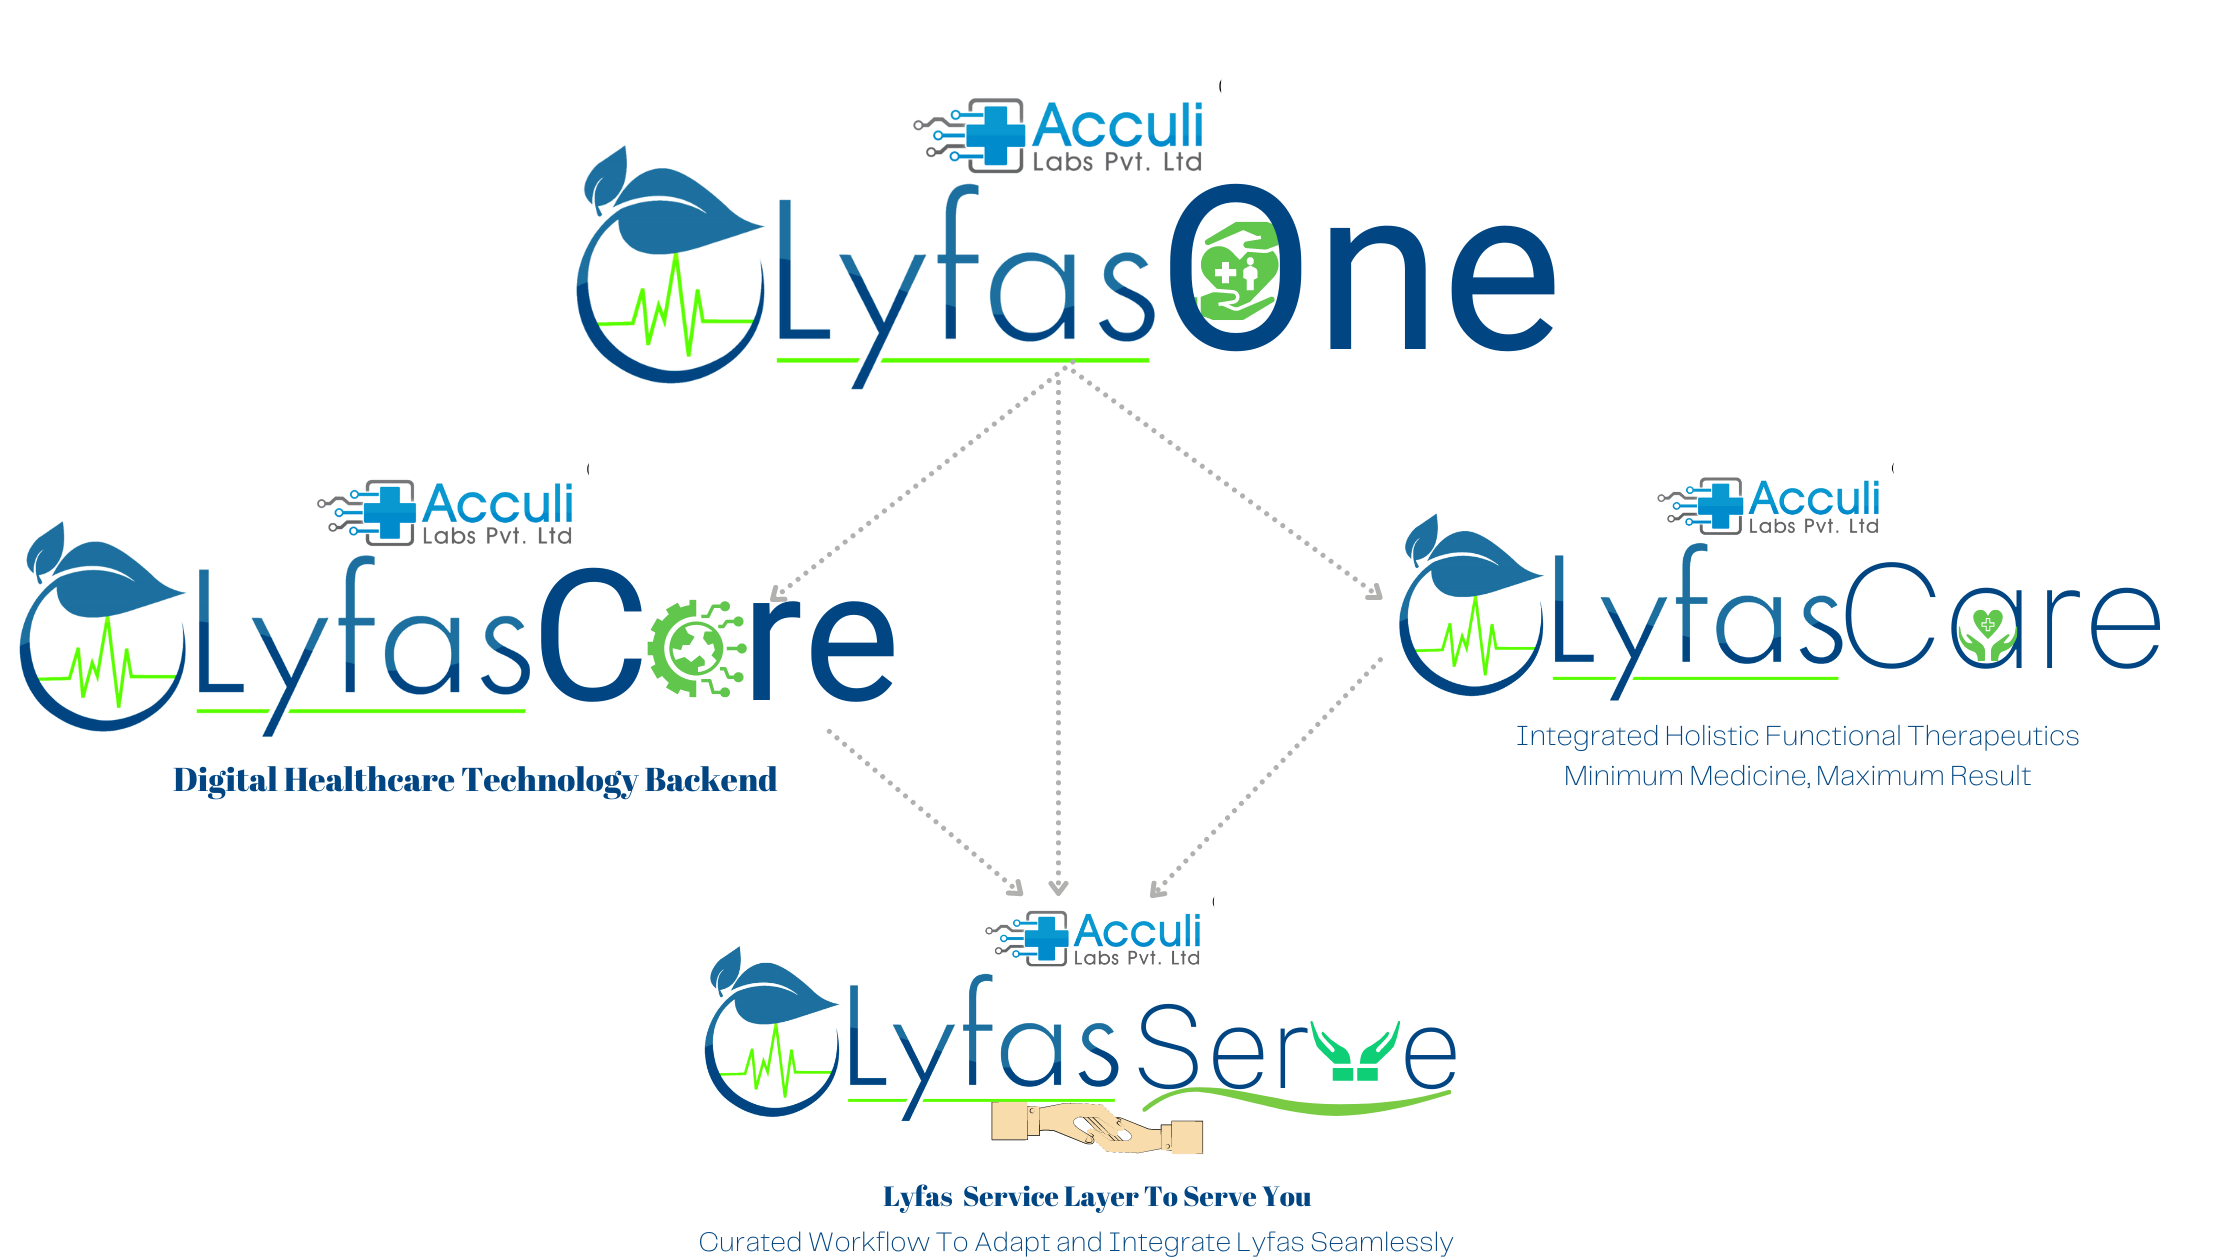 Lyfas One Lyfas Core Lyfas Care and Lyfas Serve